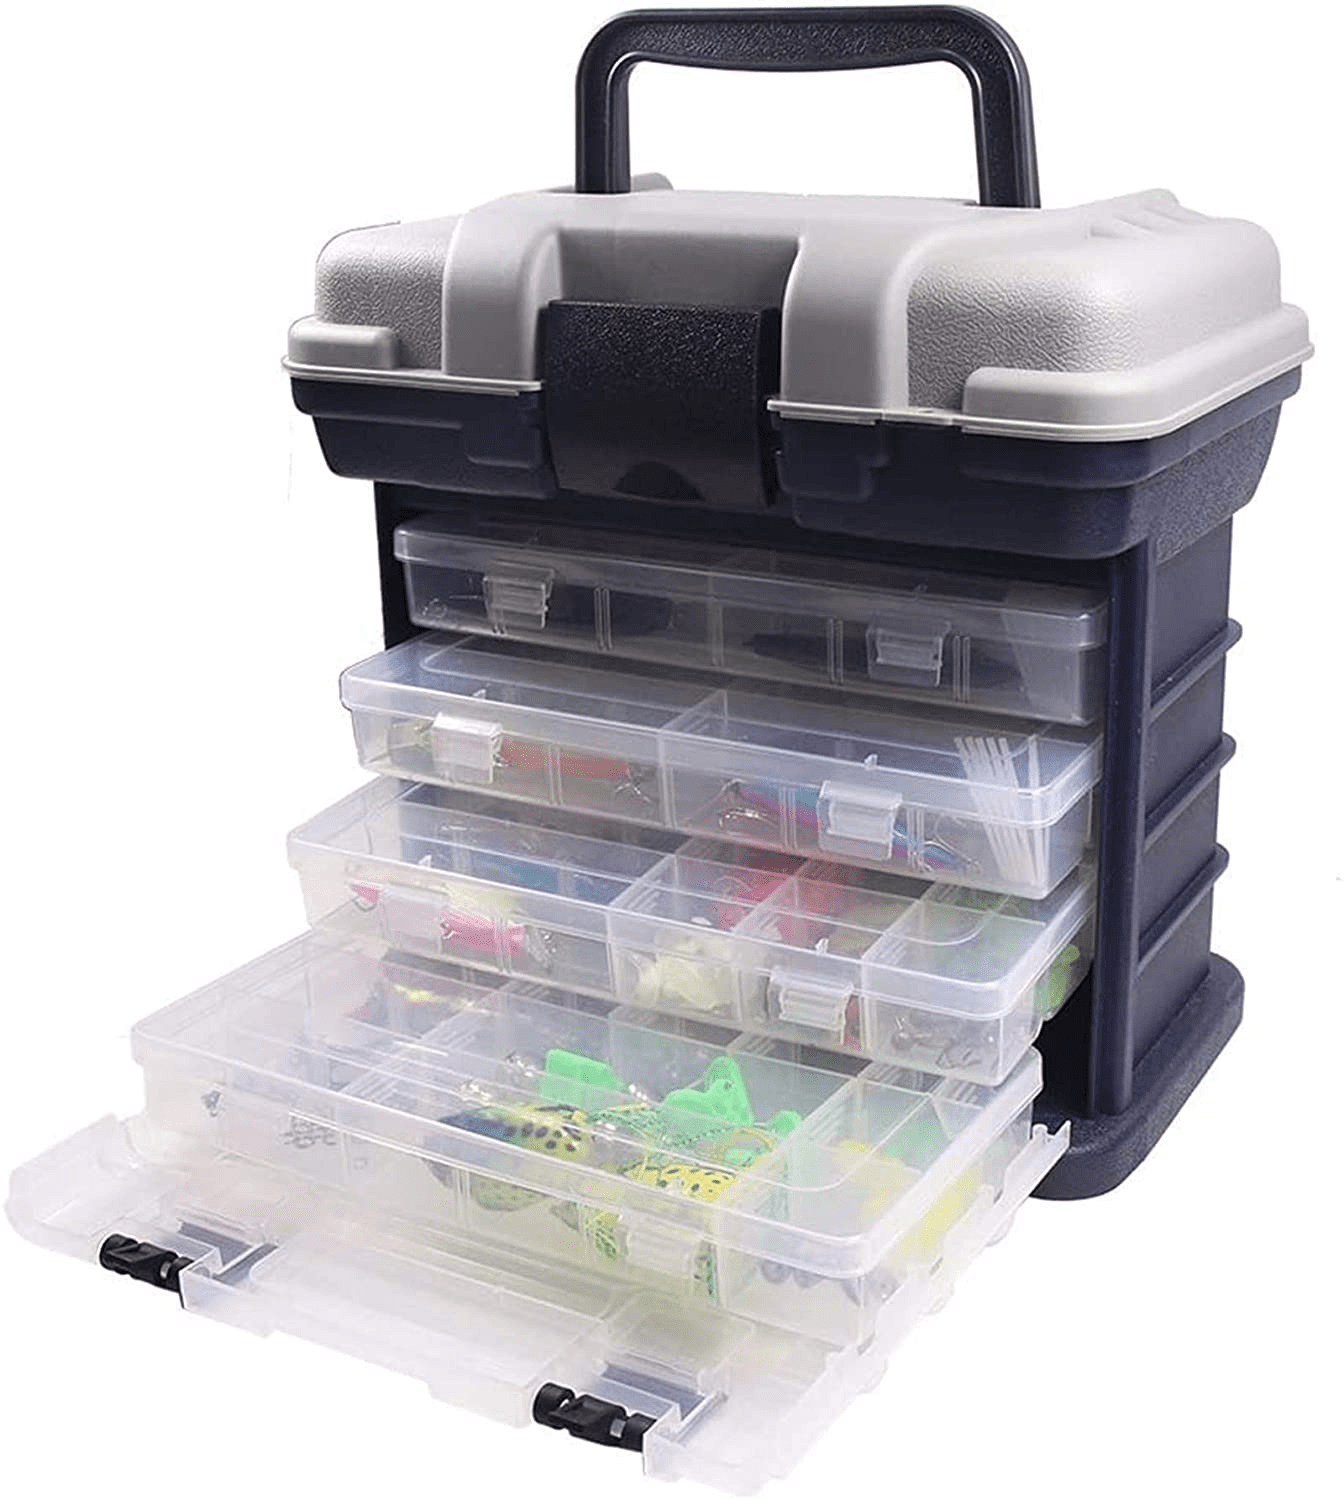 Otterk Portable Fishing Tackle Box with tackle boxes